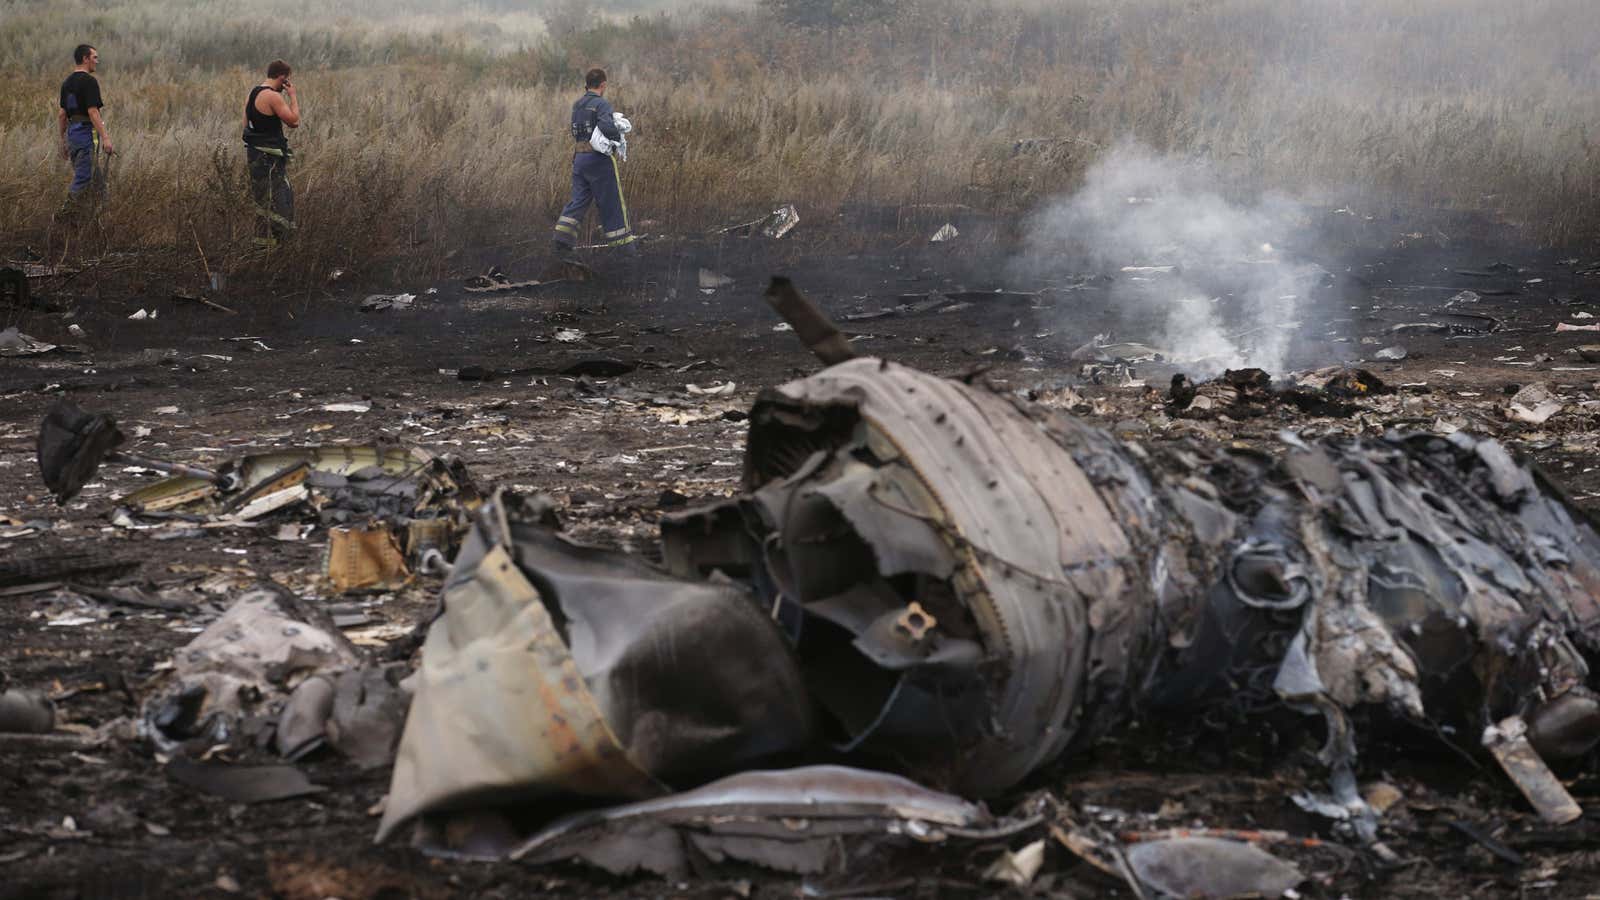 Emergency responders at the crash site of Malaysian Airlines flight 17.